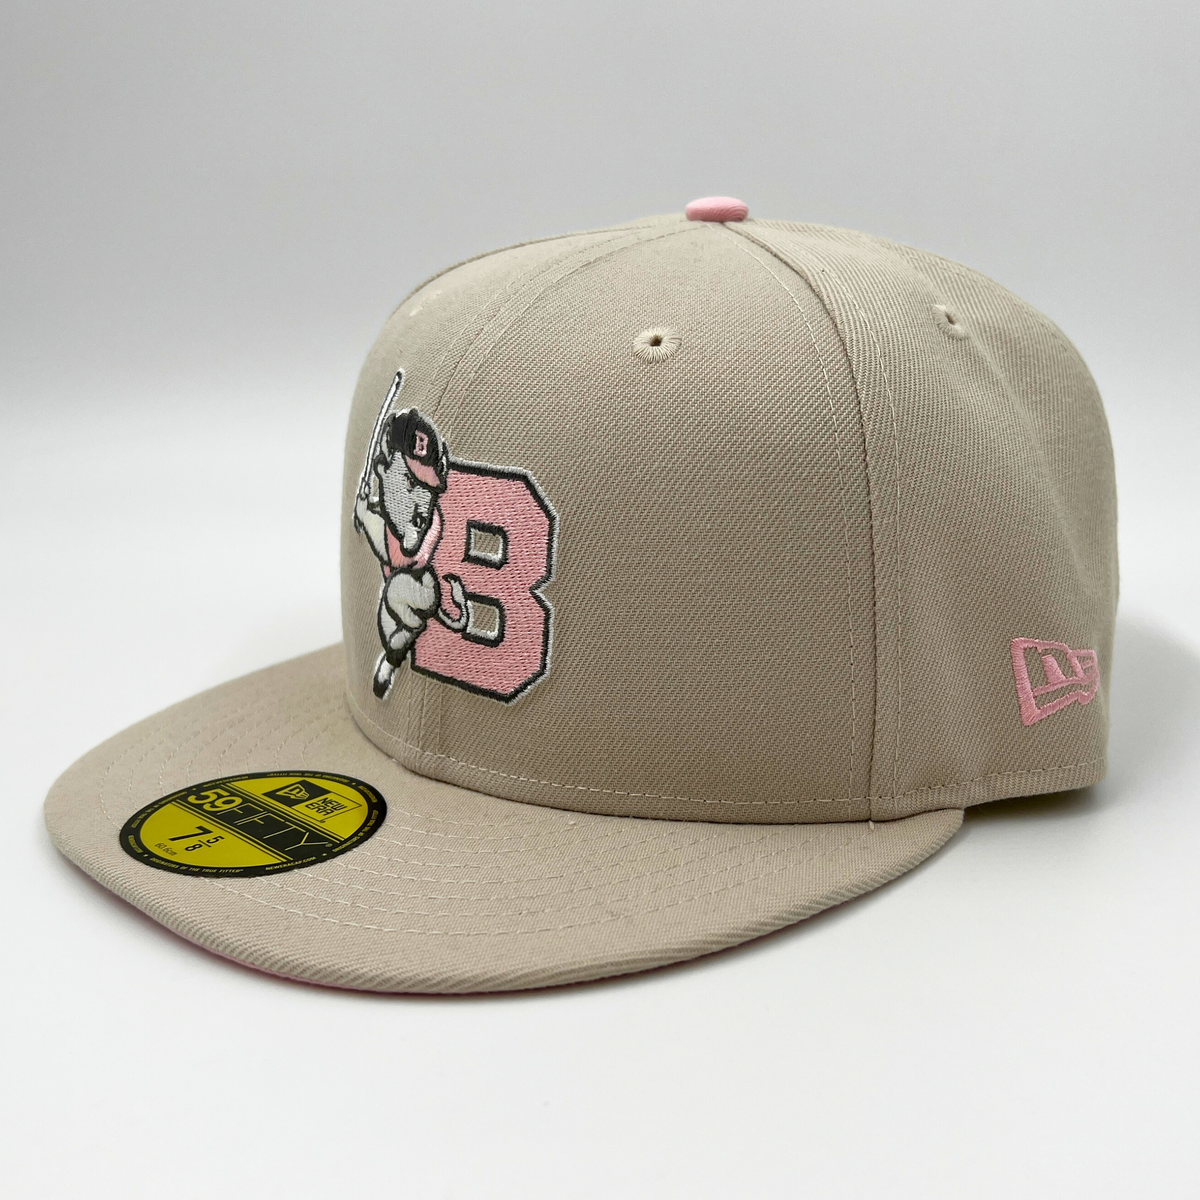 New Era Bisons Mother's Day Fitted Hat